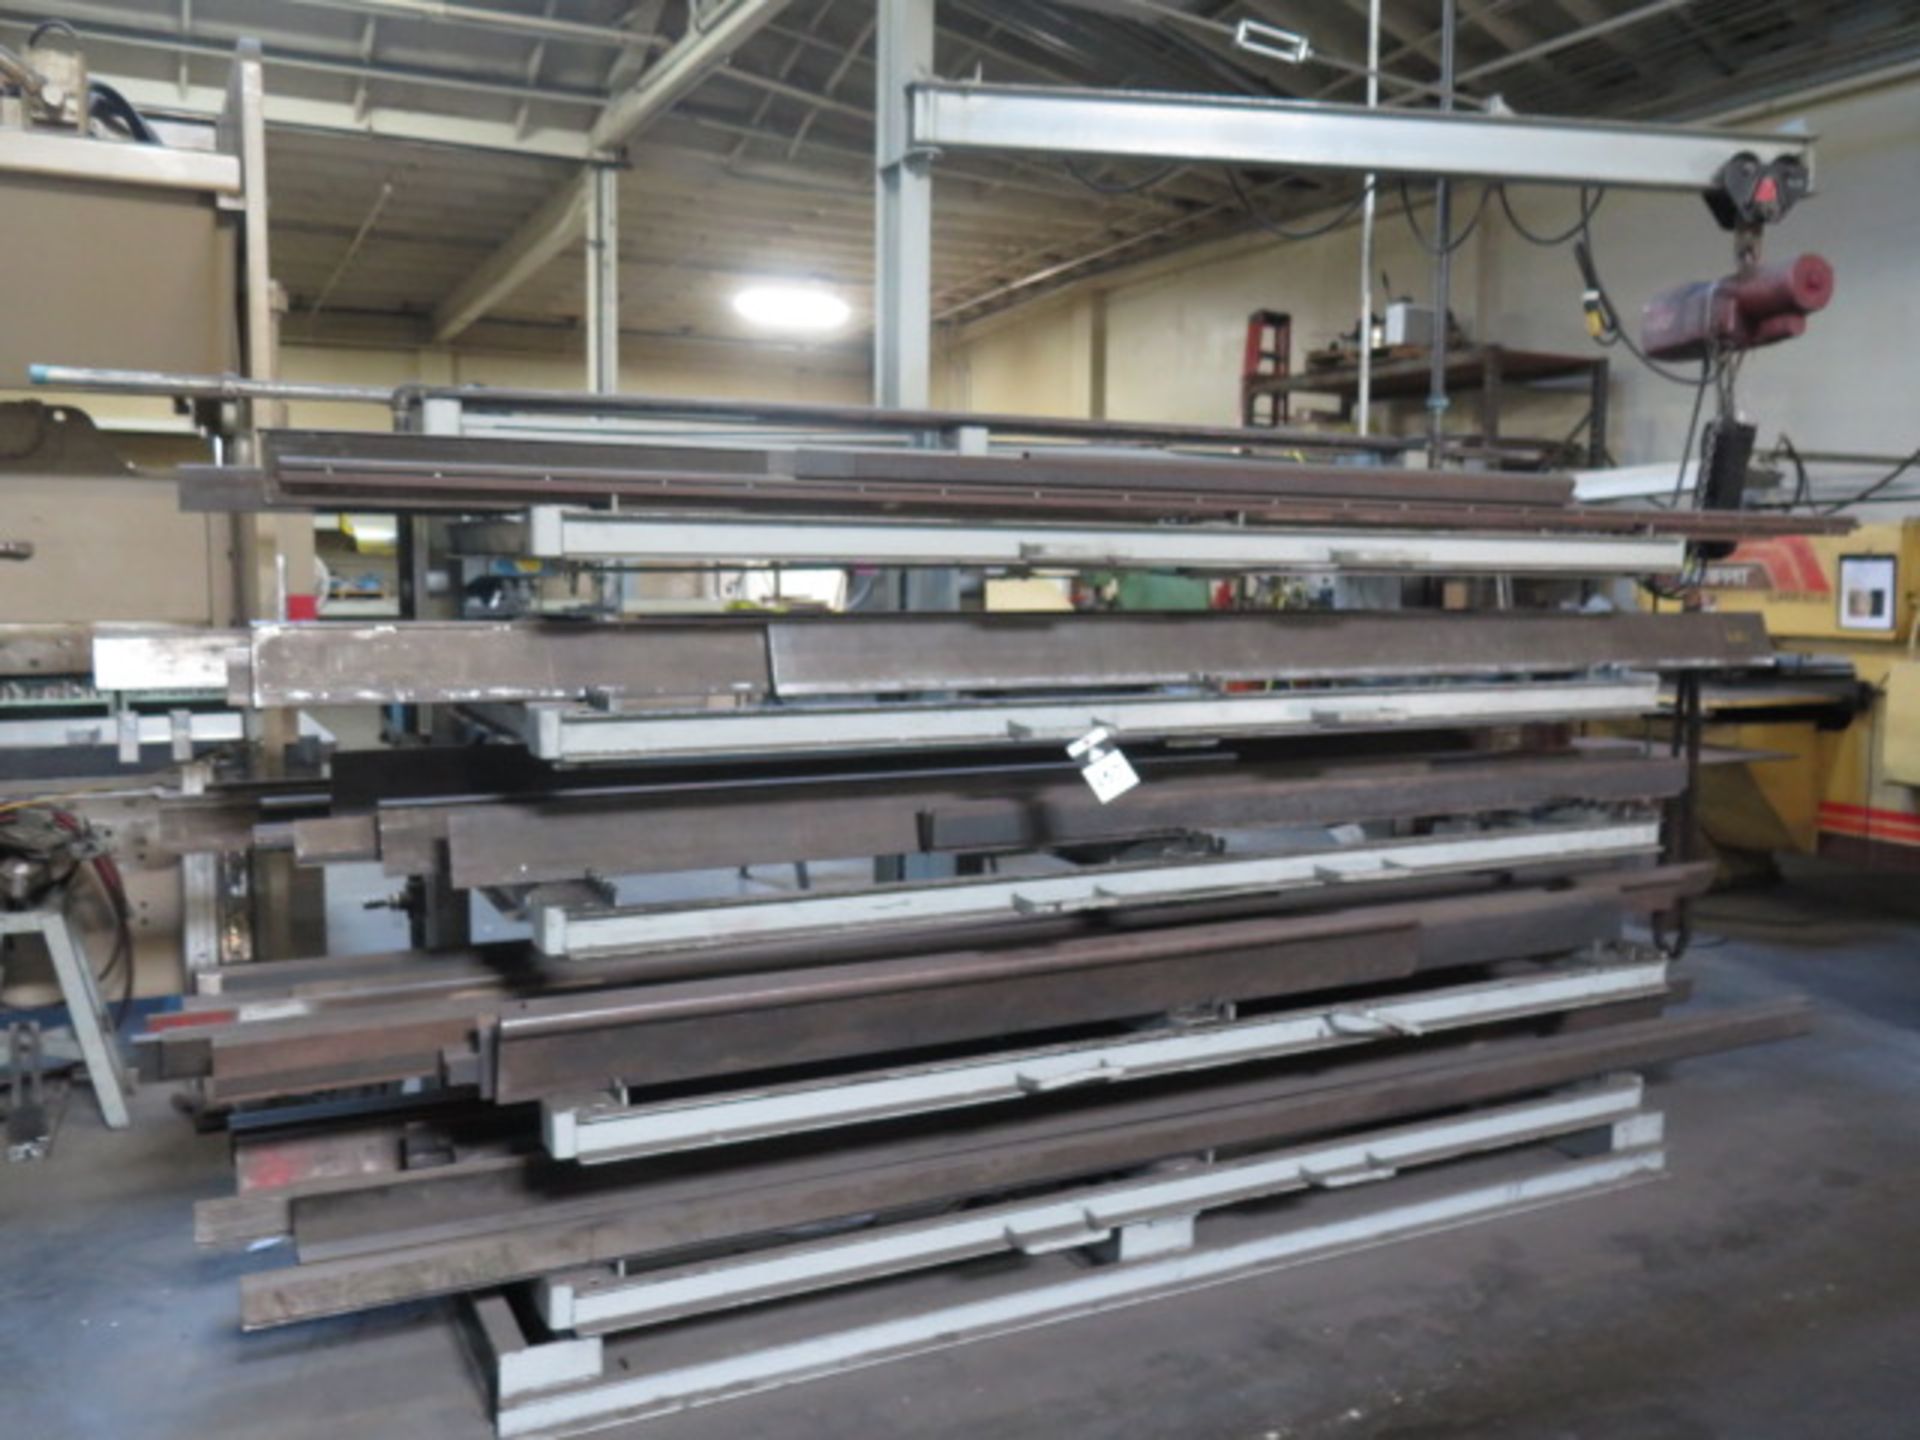 Press Brake Dies w/ (5) Drawer Style Slide-Out Rack, Built-In Jib and 1/2 Ton Cap Electric Hoist (